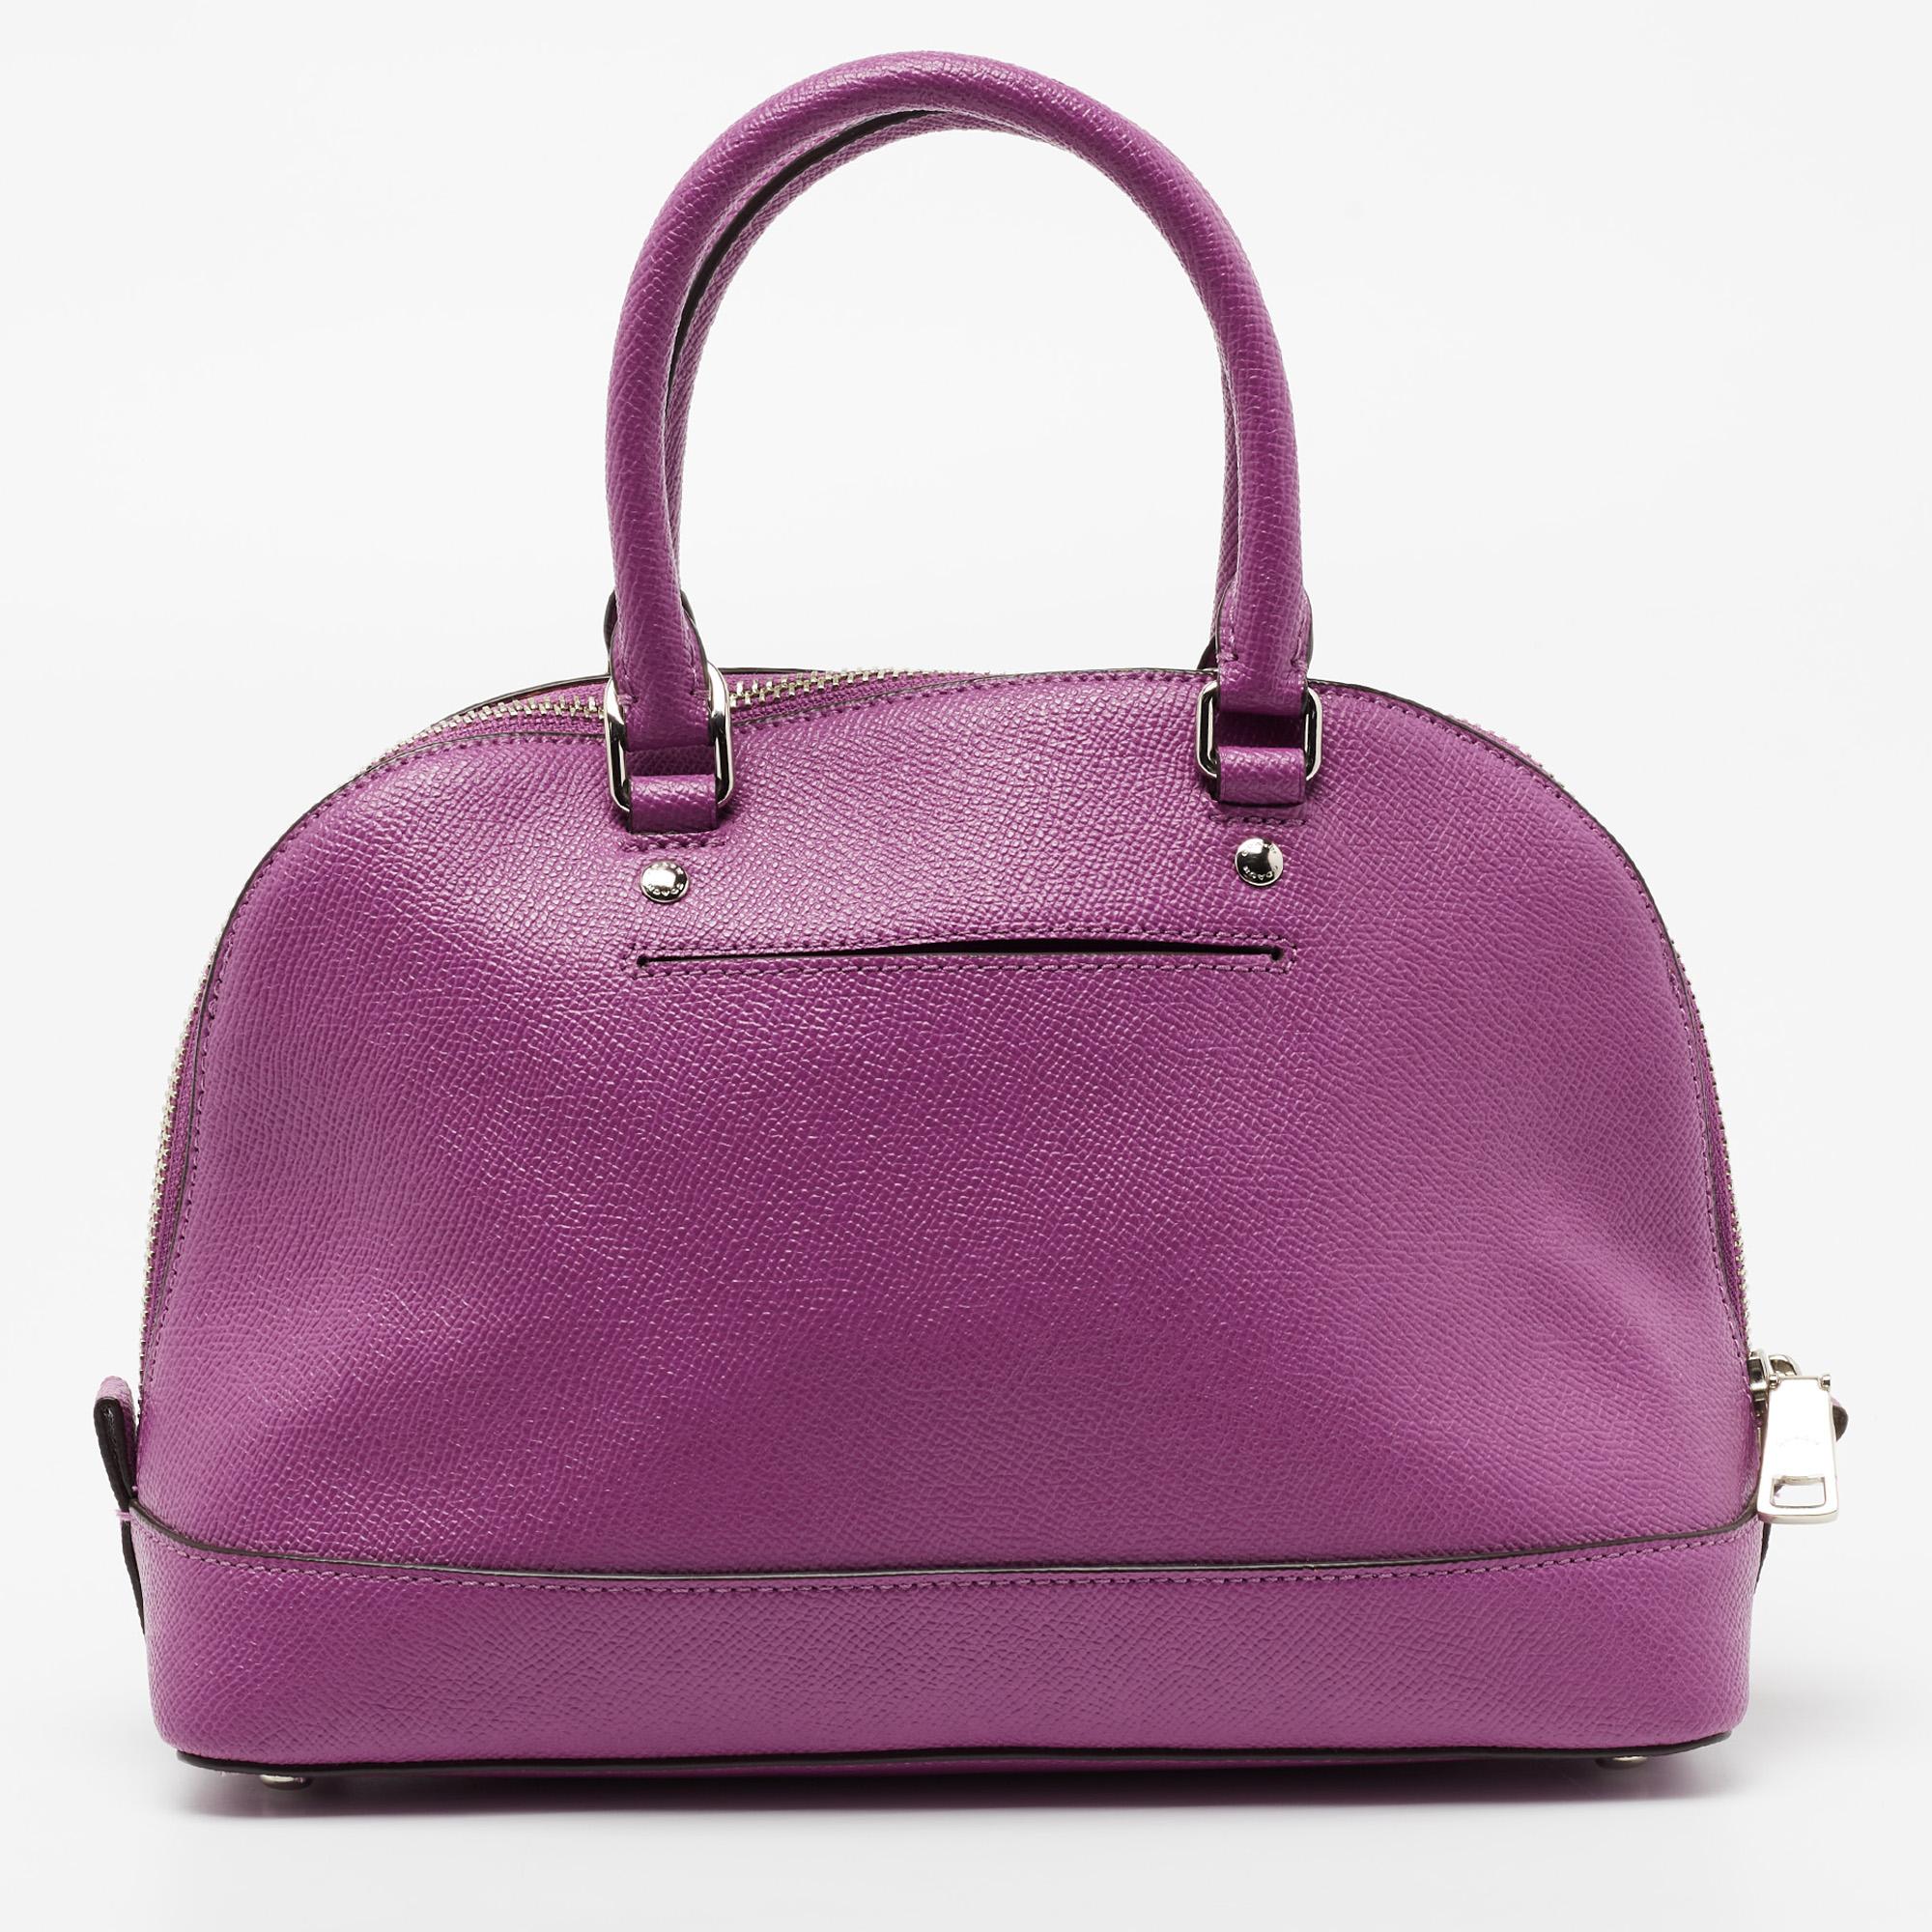 The Sierra is one of the most loved bags from Coach. This mini Sierra satchel is crafted in purple leather and equipped with a fabric interior, two handles, a shoulder strap, and metal feet. It is complete with the brand name on the